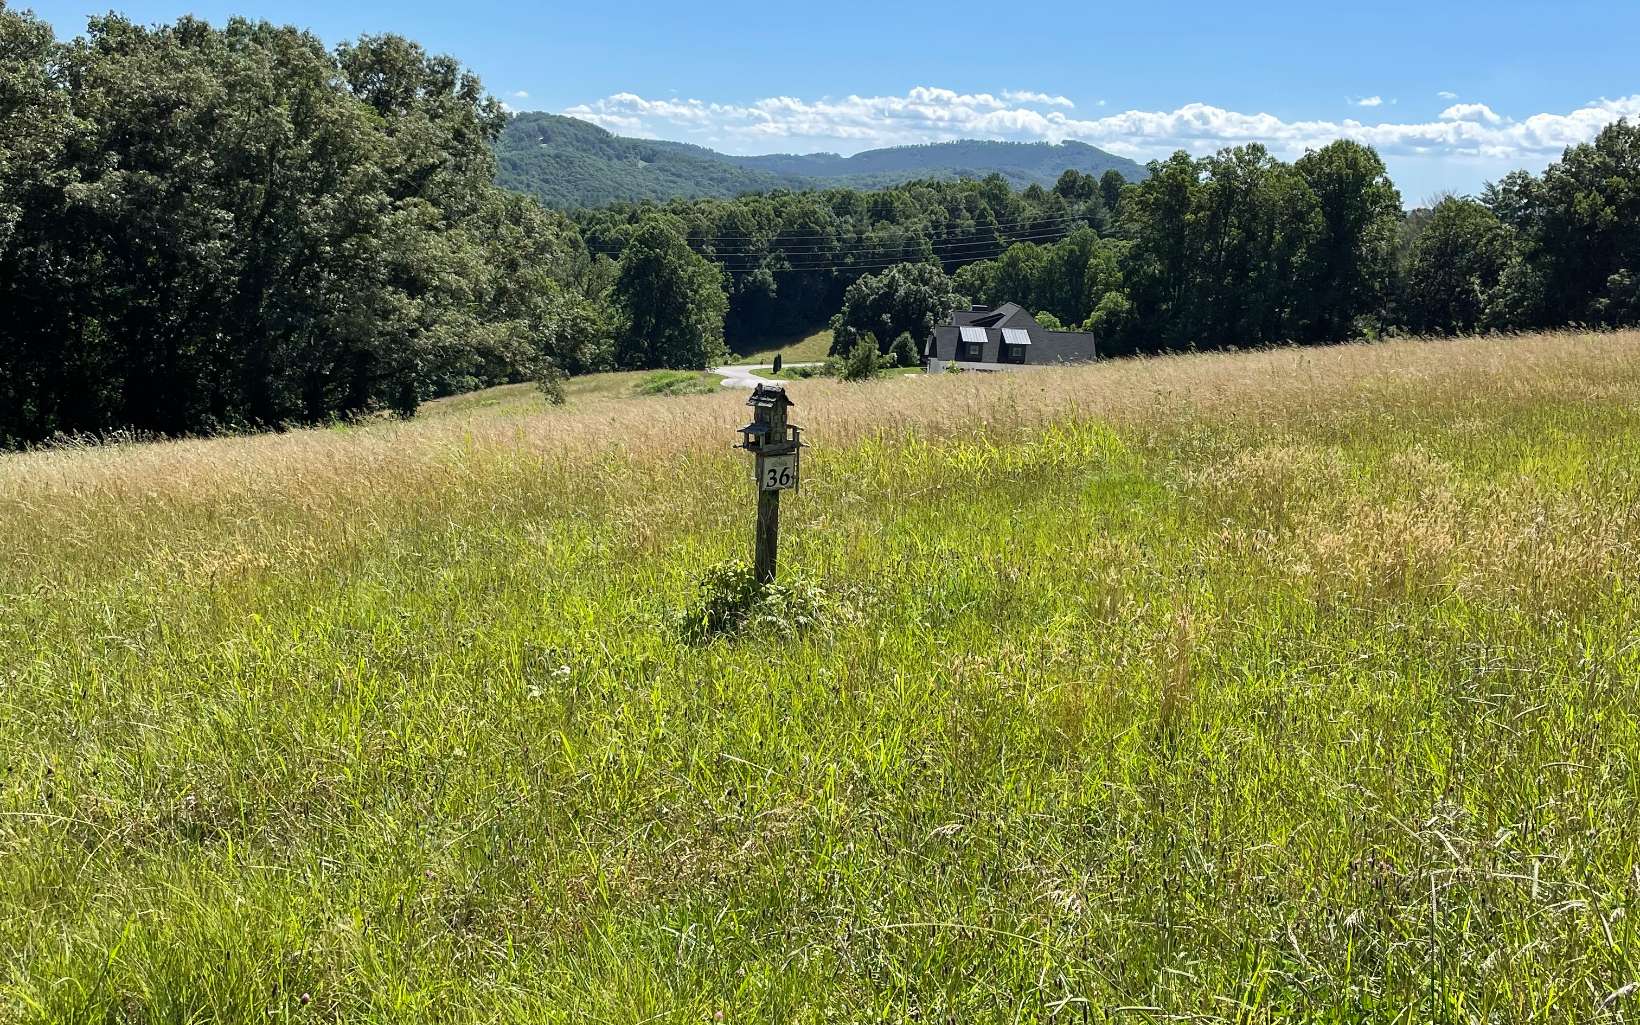 Check out this beautiful view lot in this upscale gated community. This acreage offers a level lot with underground utilities and year-round mountain views. Amenities include gated entrance, clubhouse, community pool, tennis courts and great walking trails. This would be an excellent site to build your new mountain home.